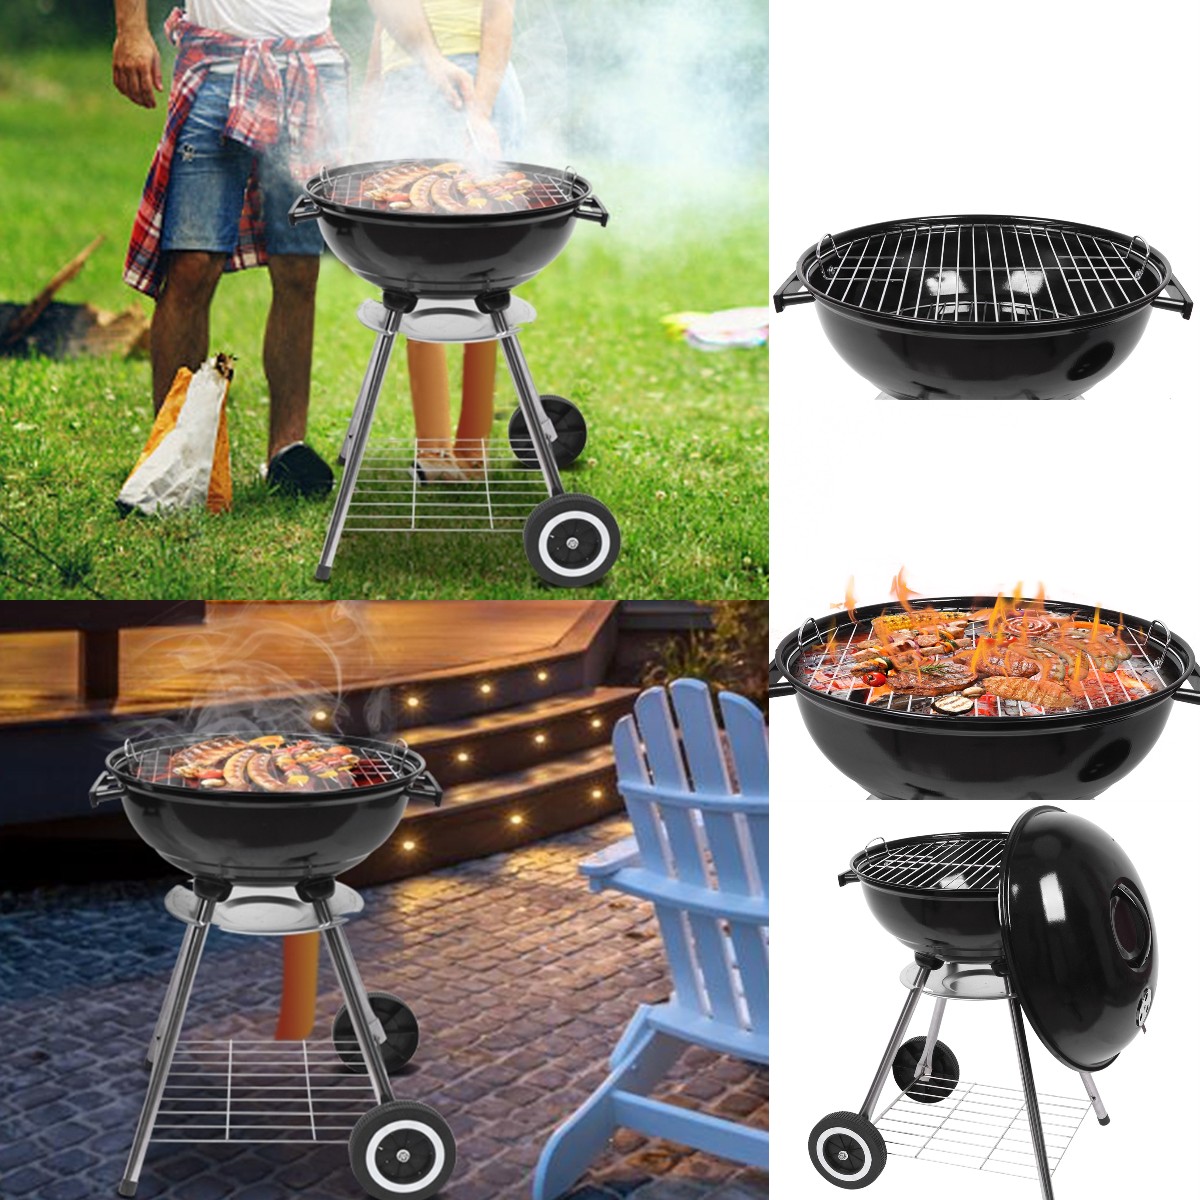 Goorabbit BBQ Smoker,Small Charcoal Grill, Charcoal BBQ Grill Charcoal with 2 Wheels, Outdoor BBQ Grill Charcoal with Ventilation & Metal Griddle, 18" Dia x 23.6" H Grill Outdoor Cooking,Black - image 1 of 14